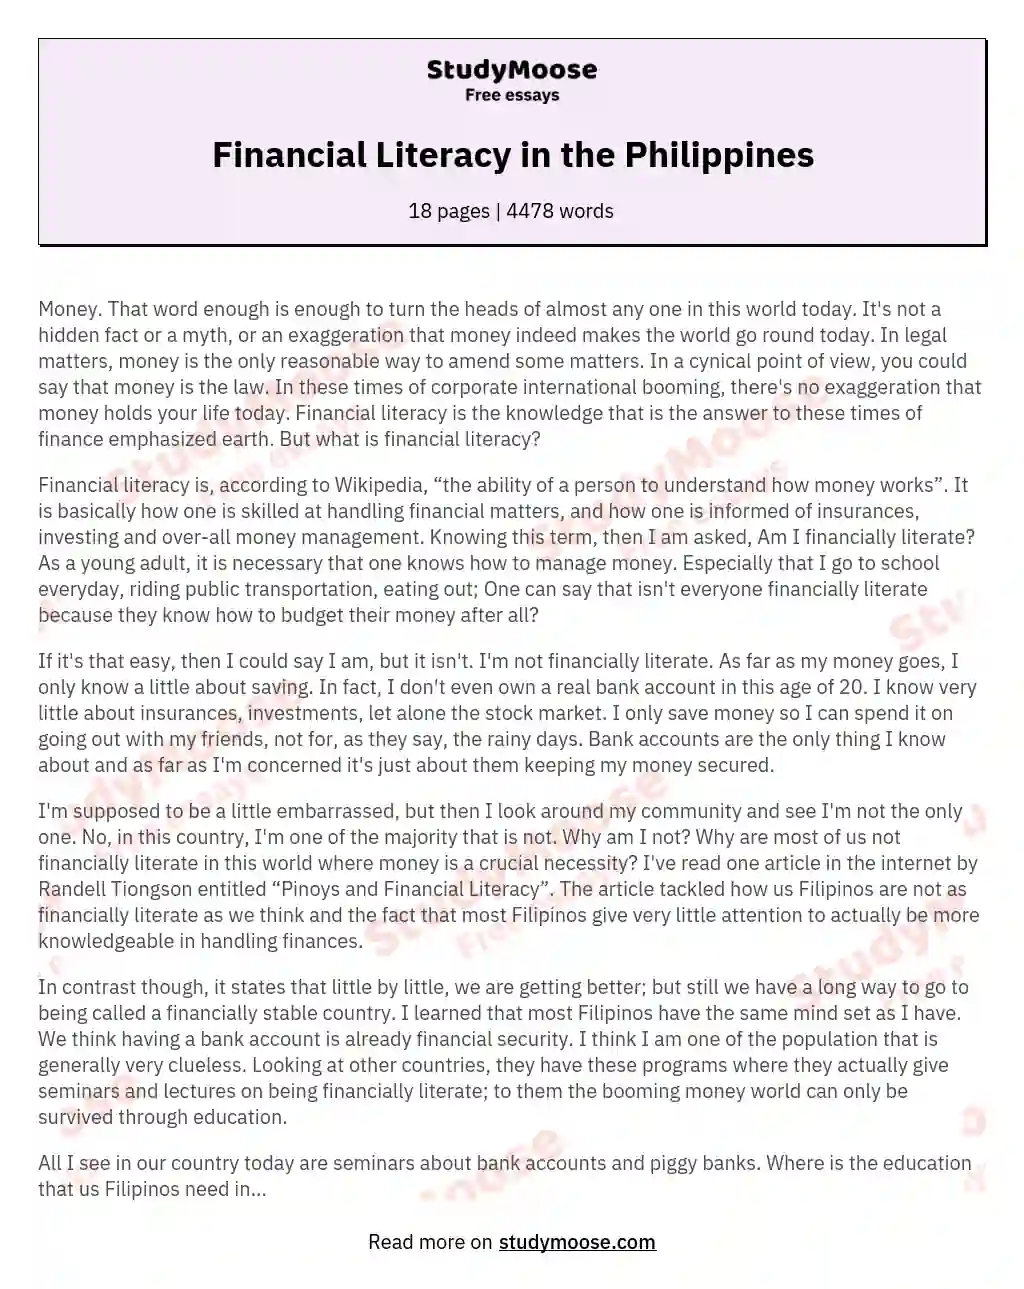 Financial Literacy in the Philippines essay